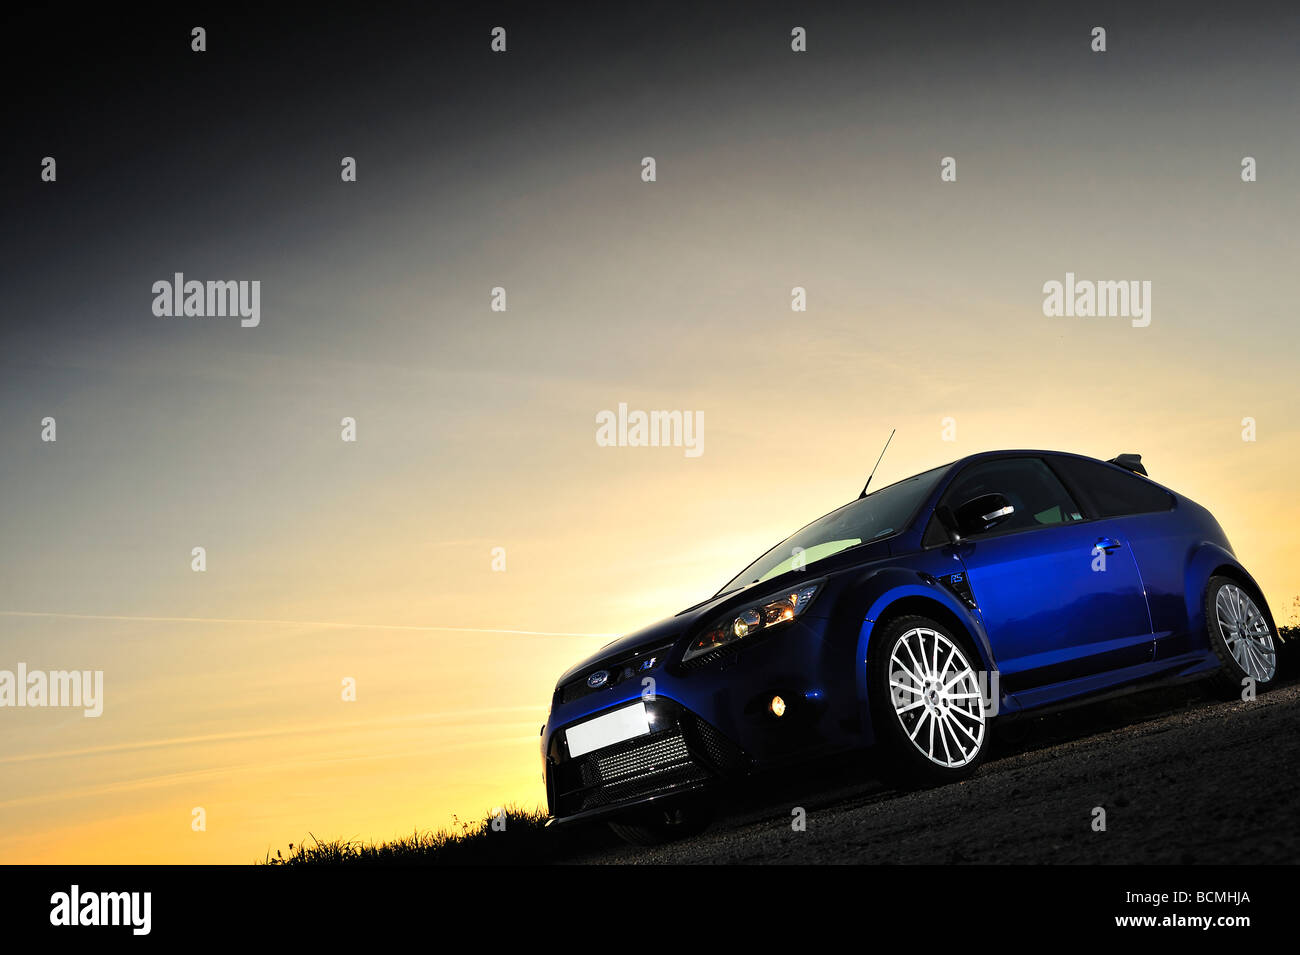 The New Ford Focus RS artistically lit and photographed at sunset Stock Photo